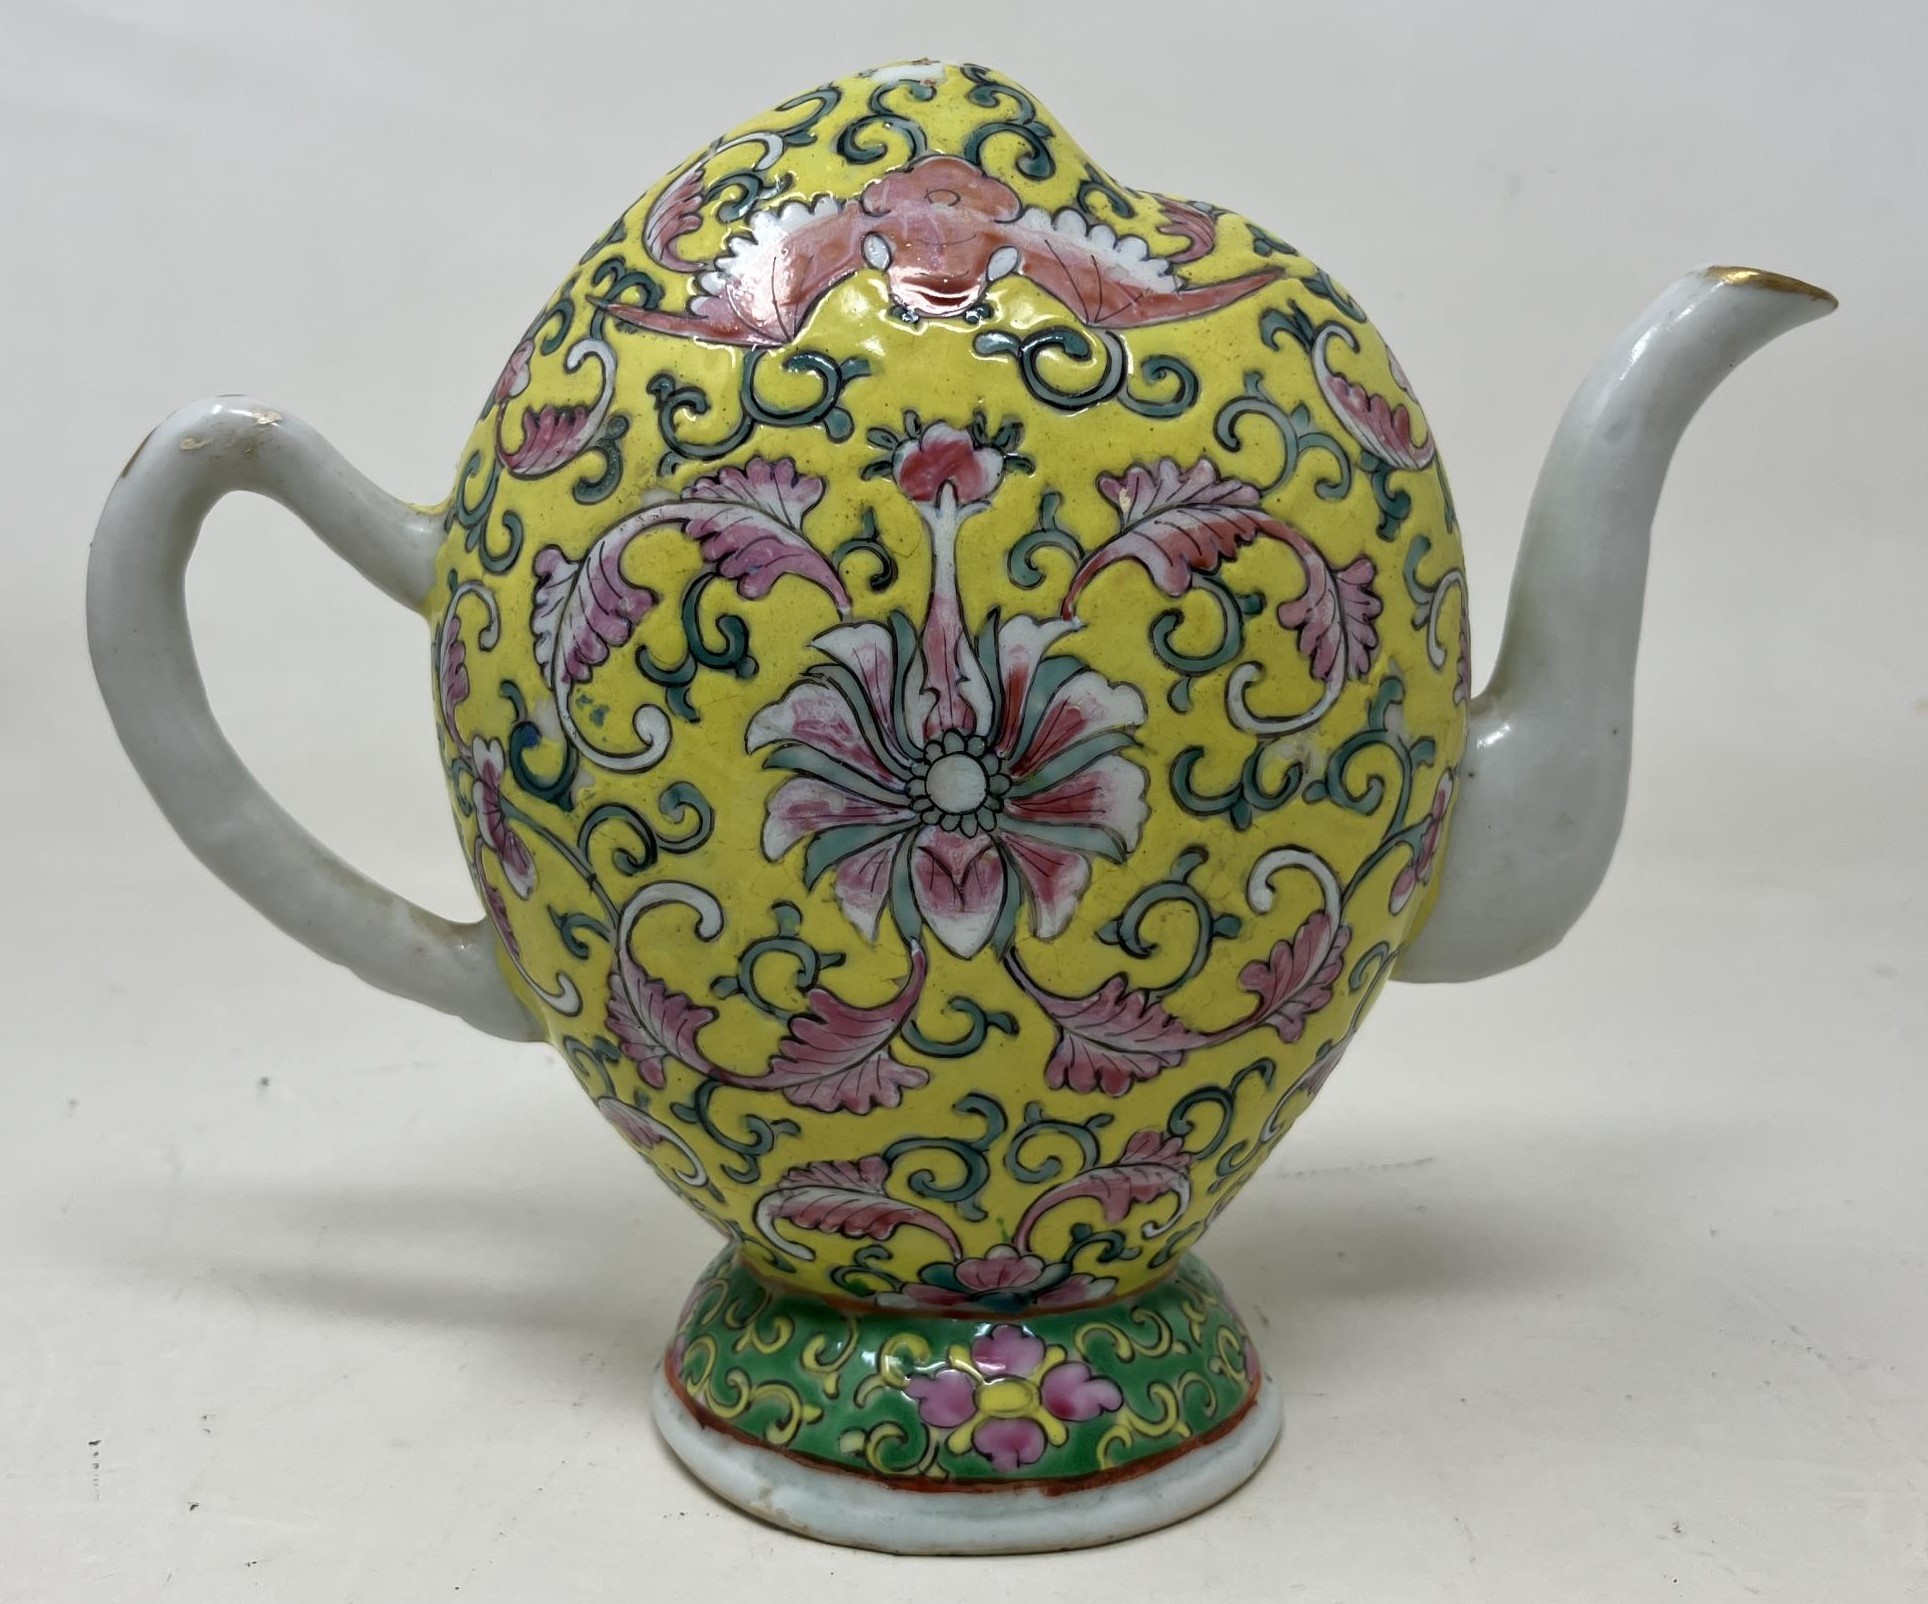 A Chinese Cadogan style teapot, of melon form, decorated bats and floral motifs on a yellow